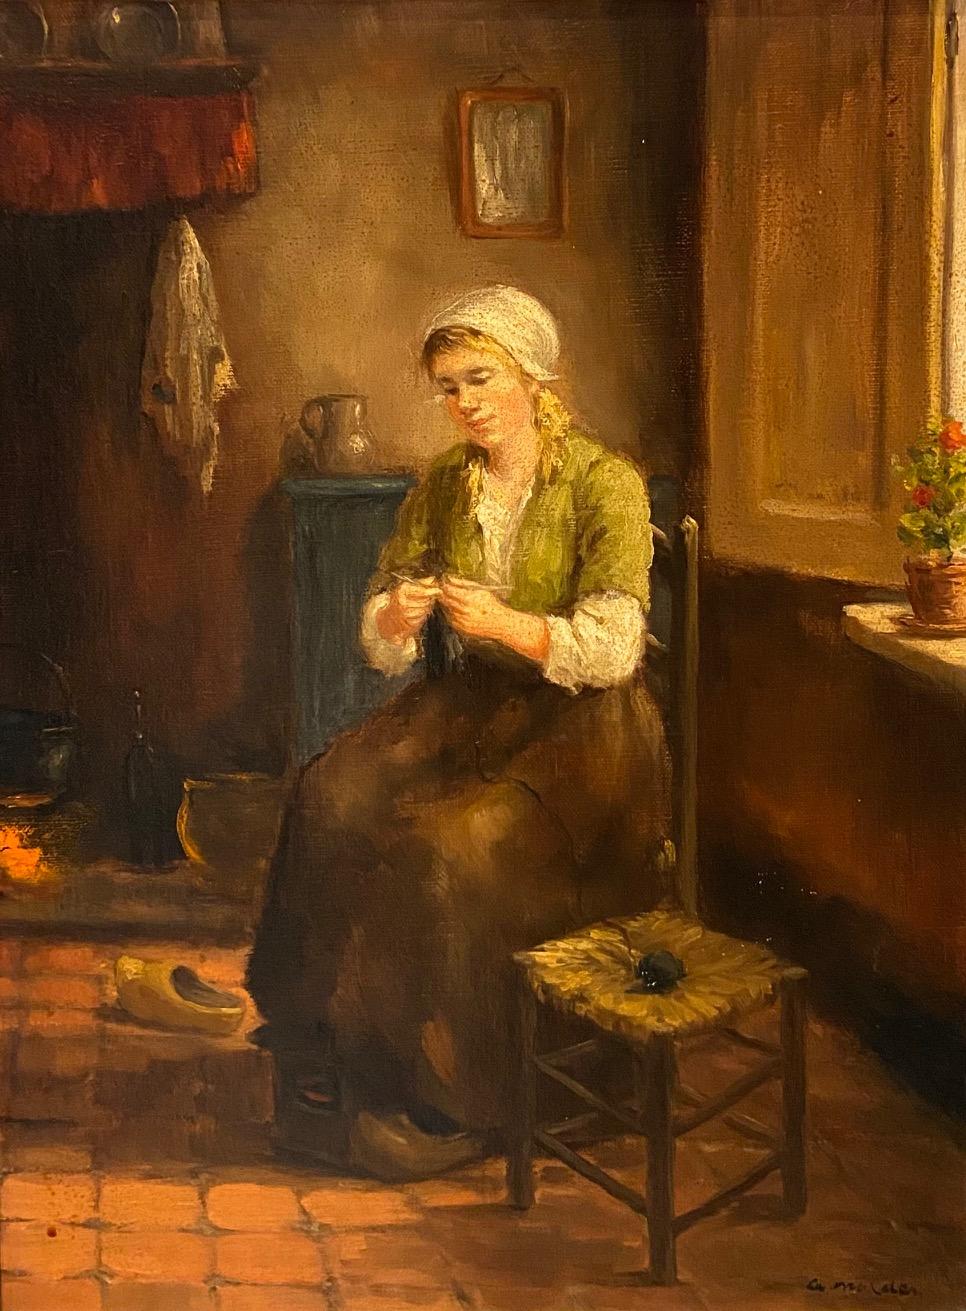 Knitting woman by Anne Marie Mulder - Oil on canvas 30x40 cm